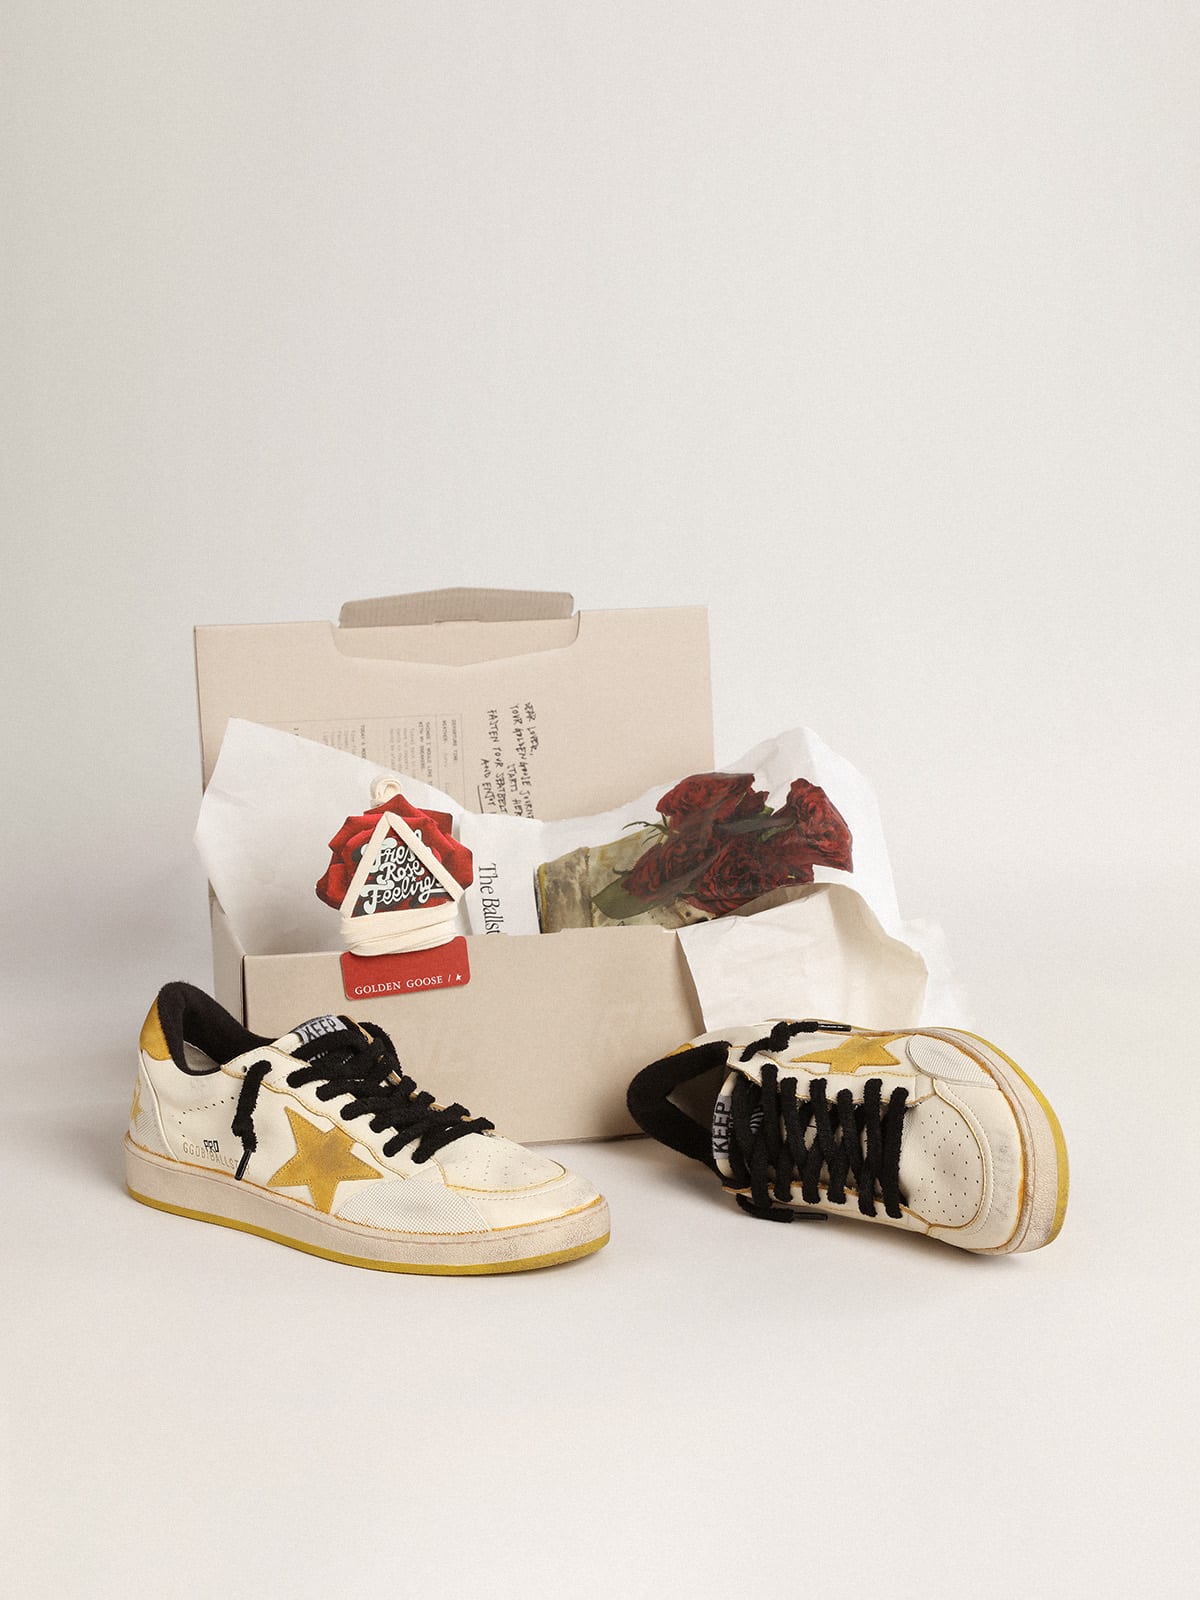 Golden Goose - Men’s Ball Star Pro in cream nappa with rubber inserts in 